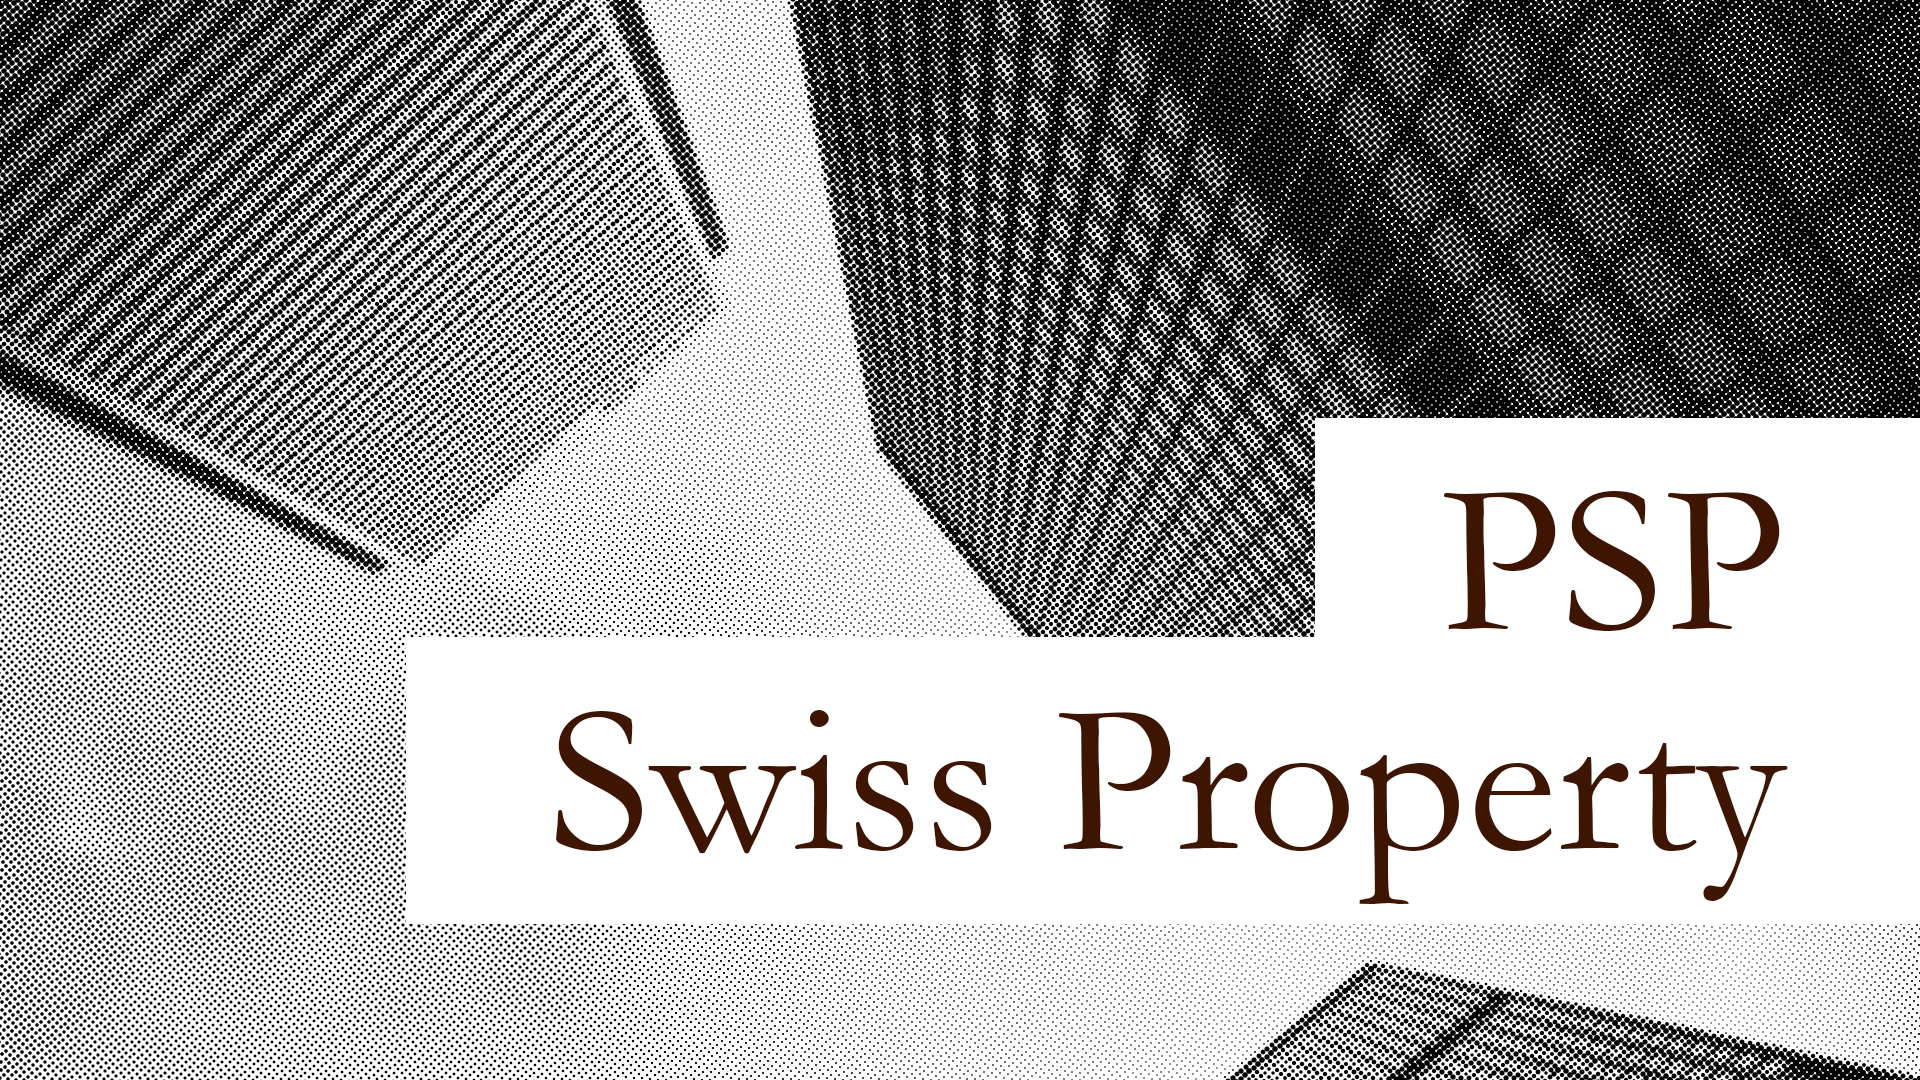 Diversifying the Wikifolio with PSP Swiss Property